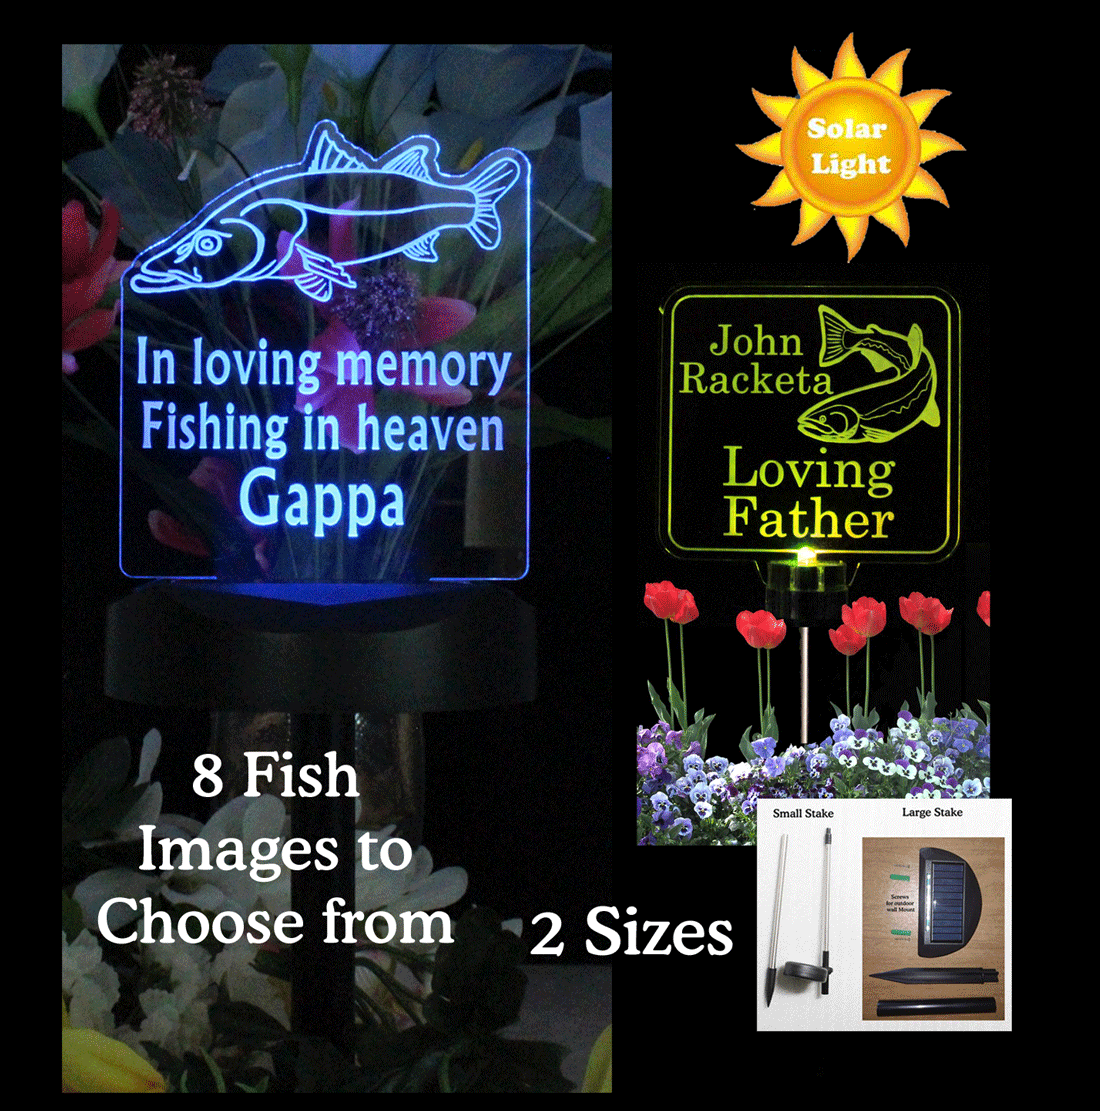 Personalized Solar Light - Trout fish